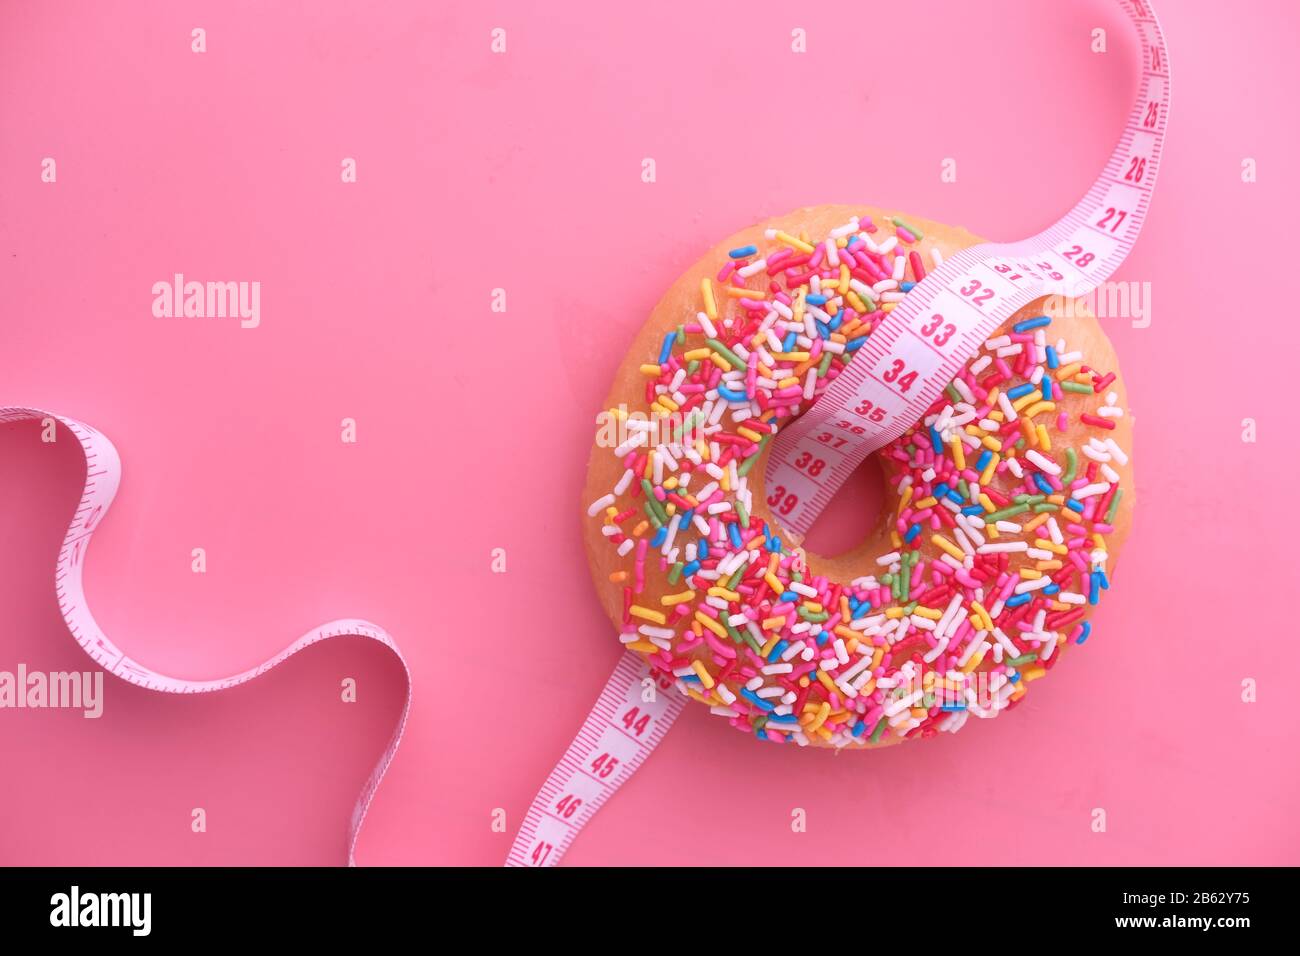 Close up of donuts and measurement tape on pink background Stock Photo